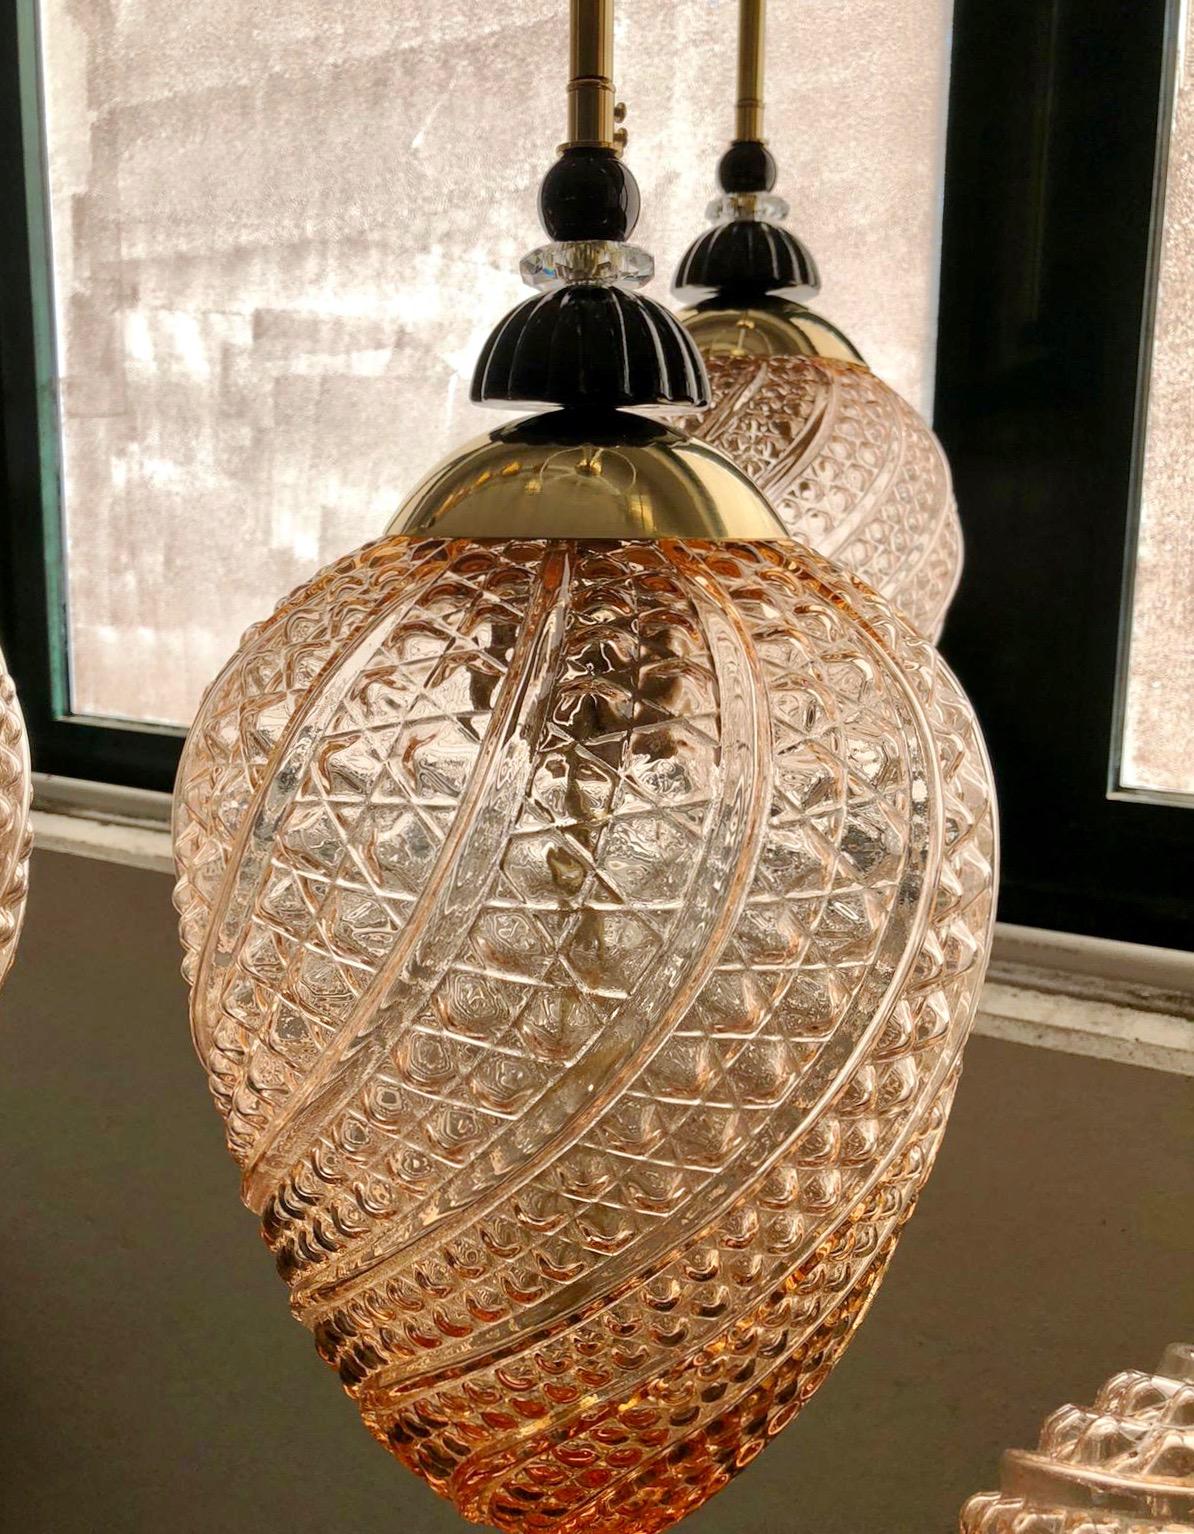 Contemporary orientalist style custom pendants / chandeliers, a modern Venetian geometric series with brass hardware, entirely handcrafted in Italy, the organic globes in egg, ovoid, and sphere shapes in an innovative blown textured Murano glass